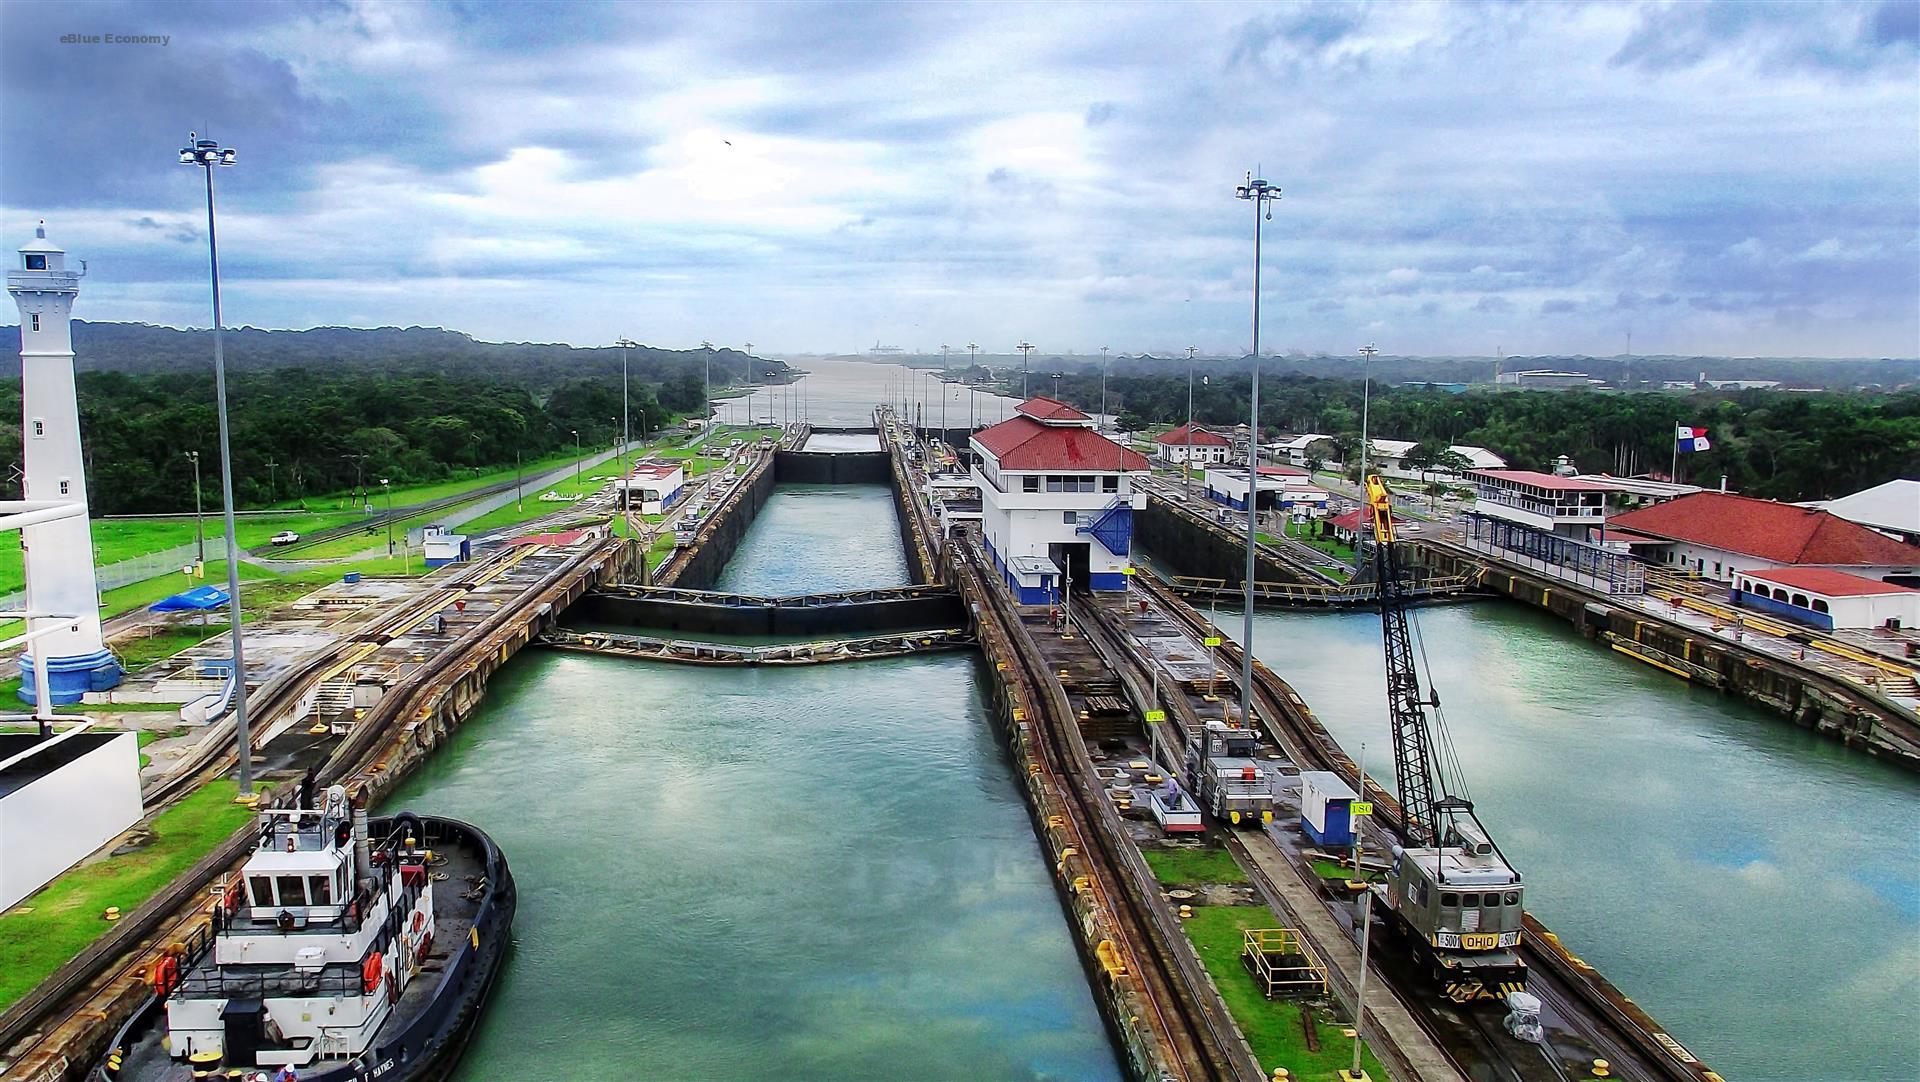 eBlue_economy_July 22nd - Panama Canal waiting time for non booked vessels (Days)